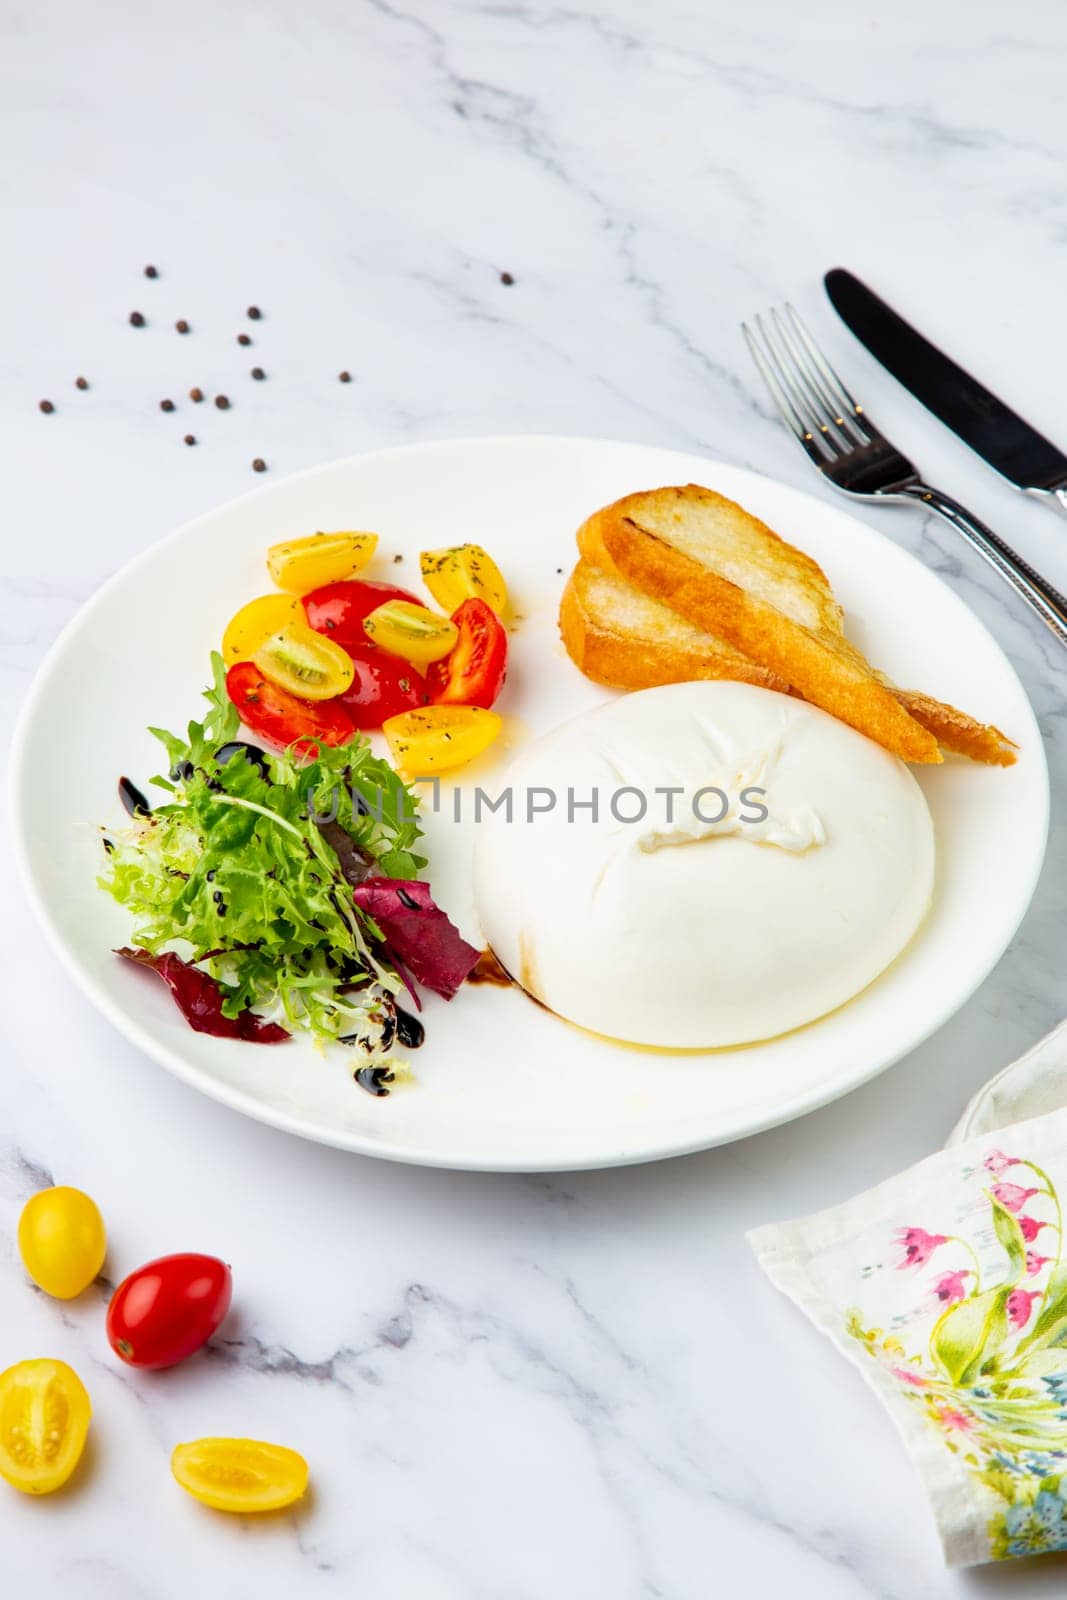 mozzarella with spinach, cherry tomatoes, wild berries and bread in a round plate side veiw by tewolf